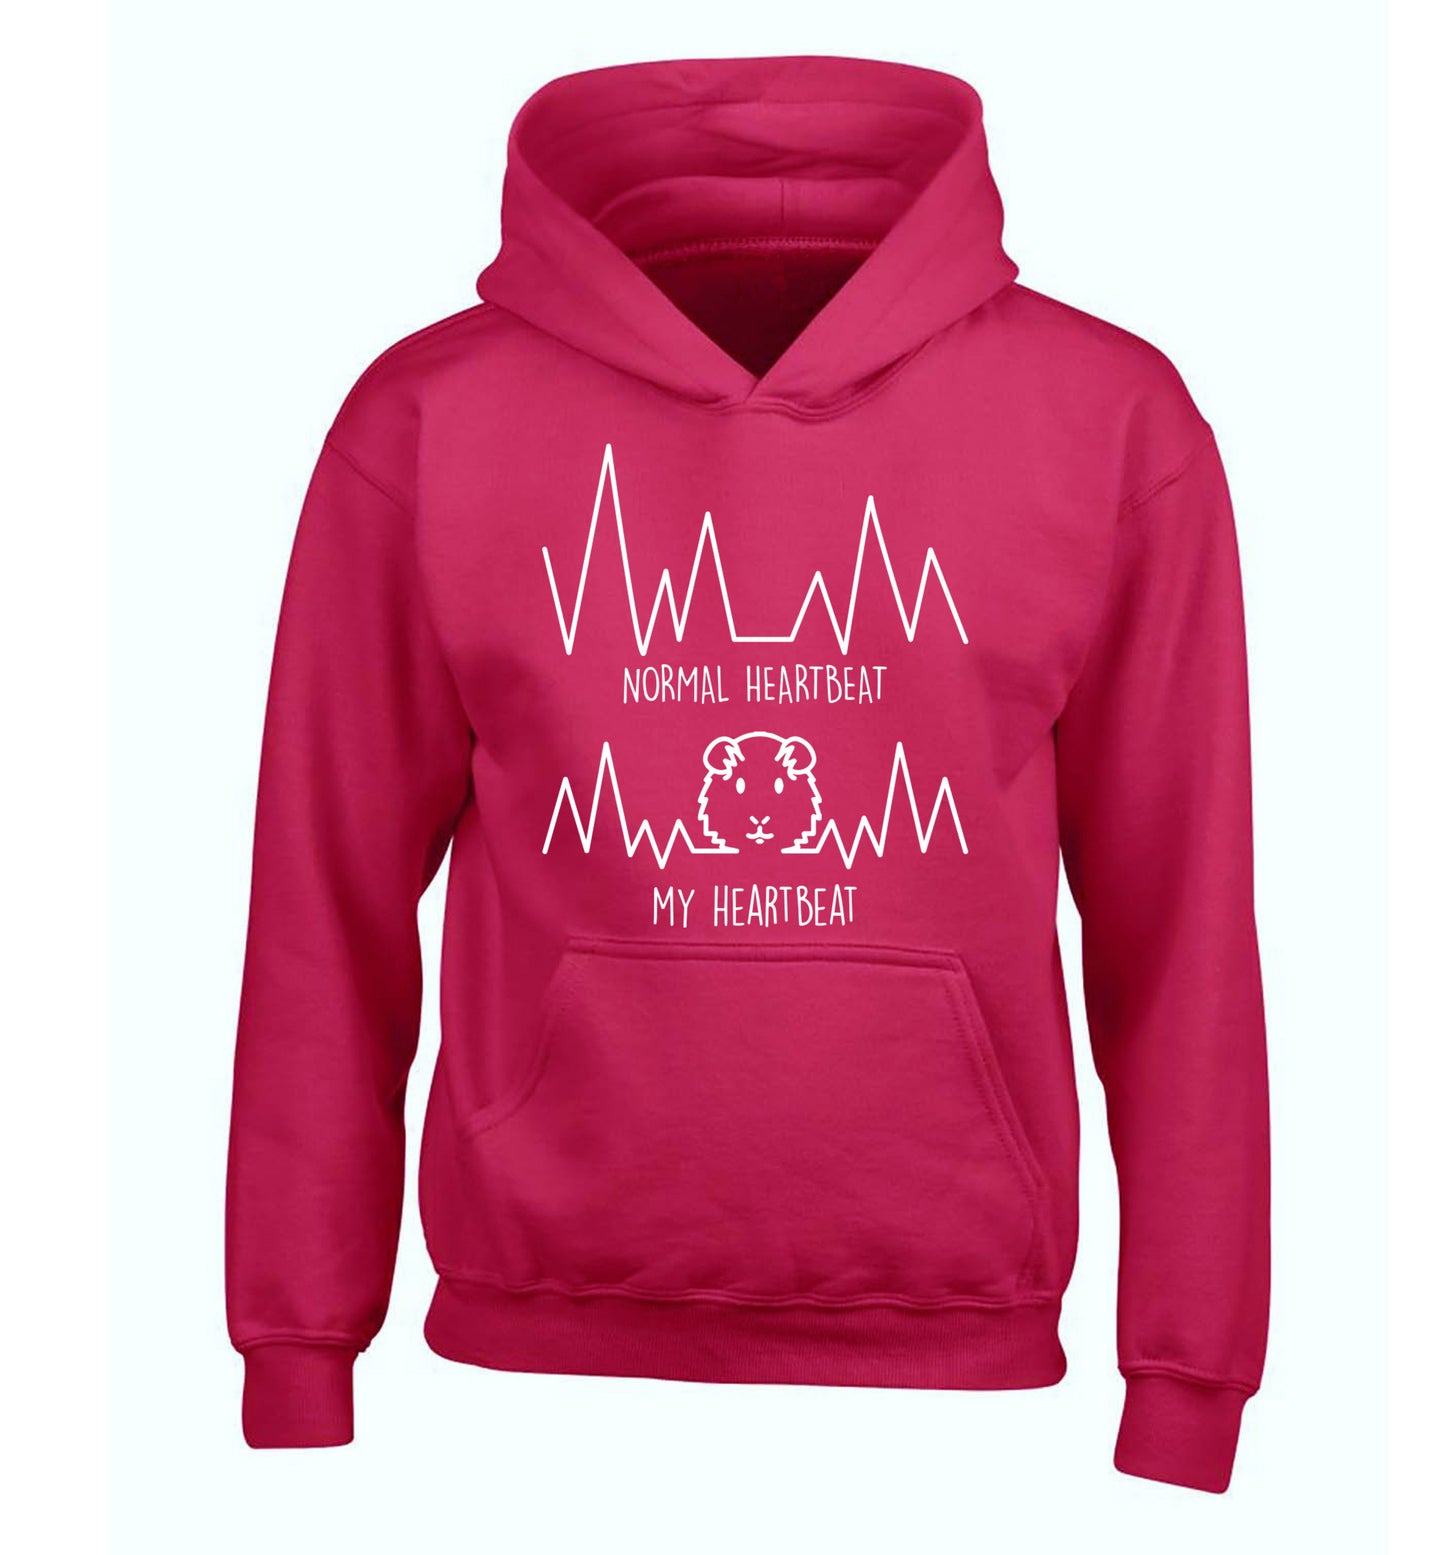 Normal heartbeat vs my heartbeat guinea pig lover children's pink hoodie 12-14 Years